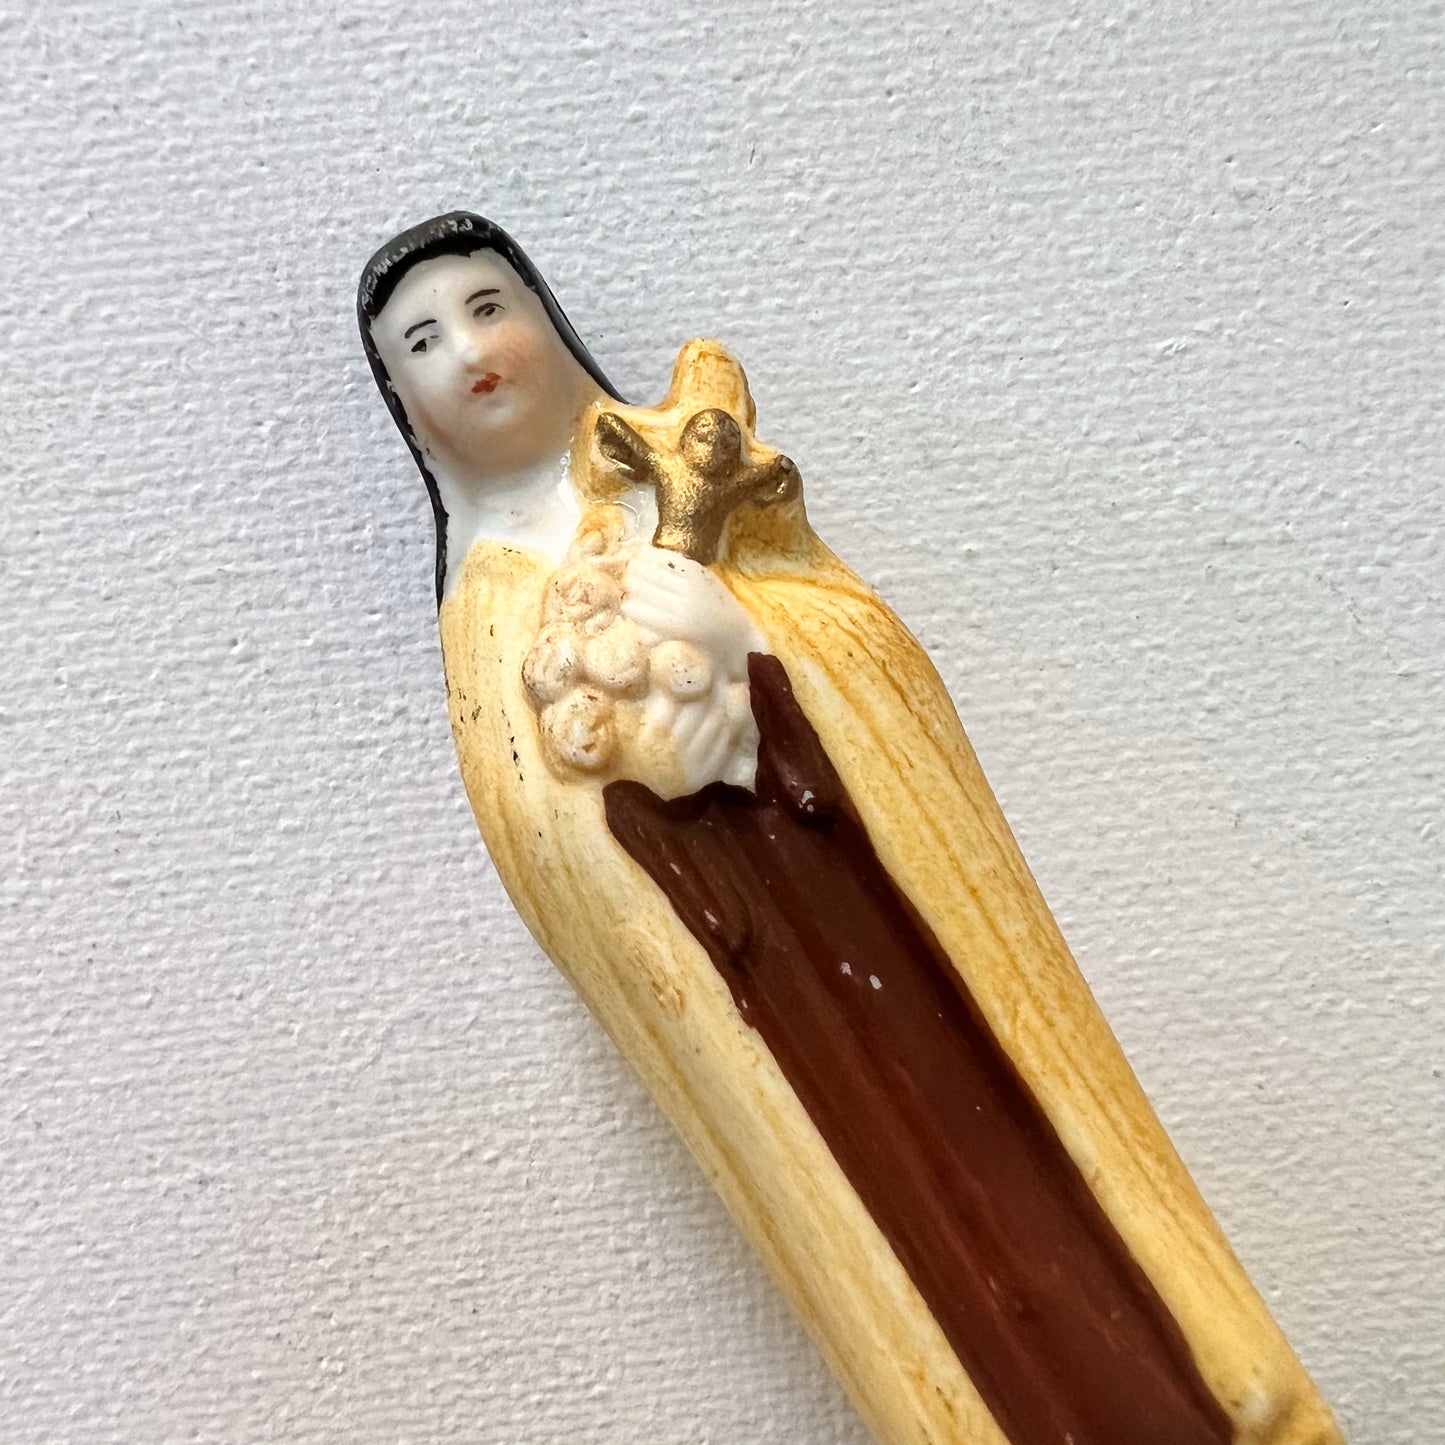 【Vintage】Germany - Saint Therese of Lisieux Pottery Statue